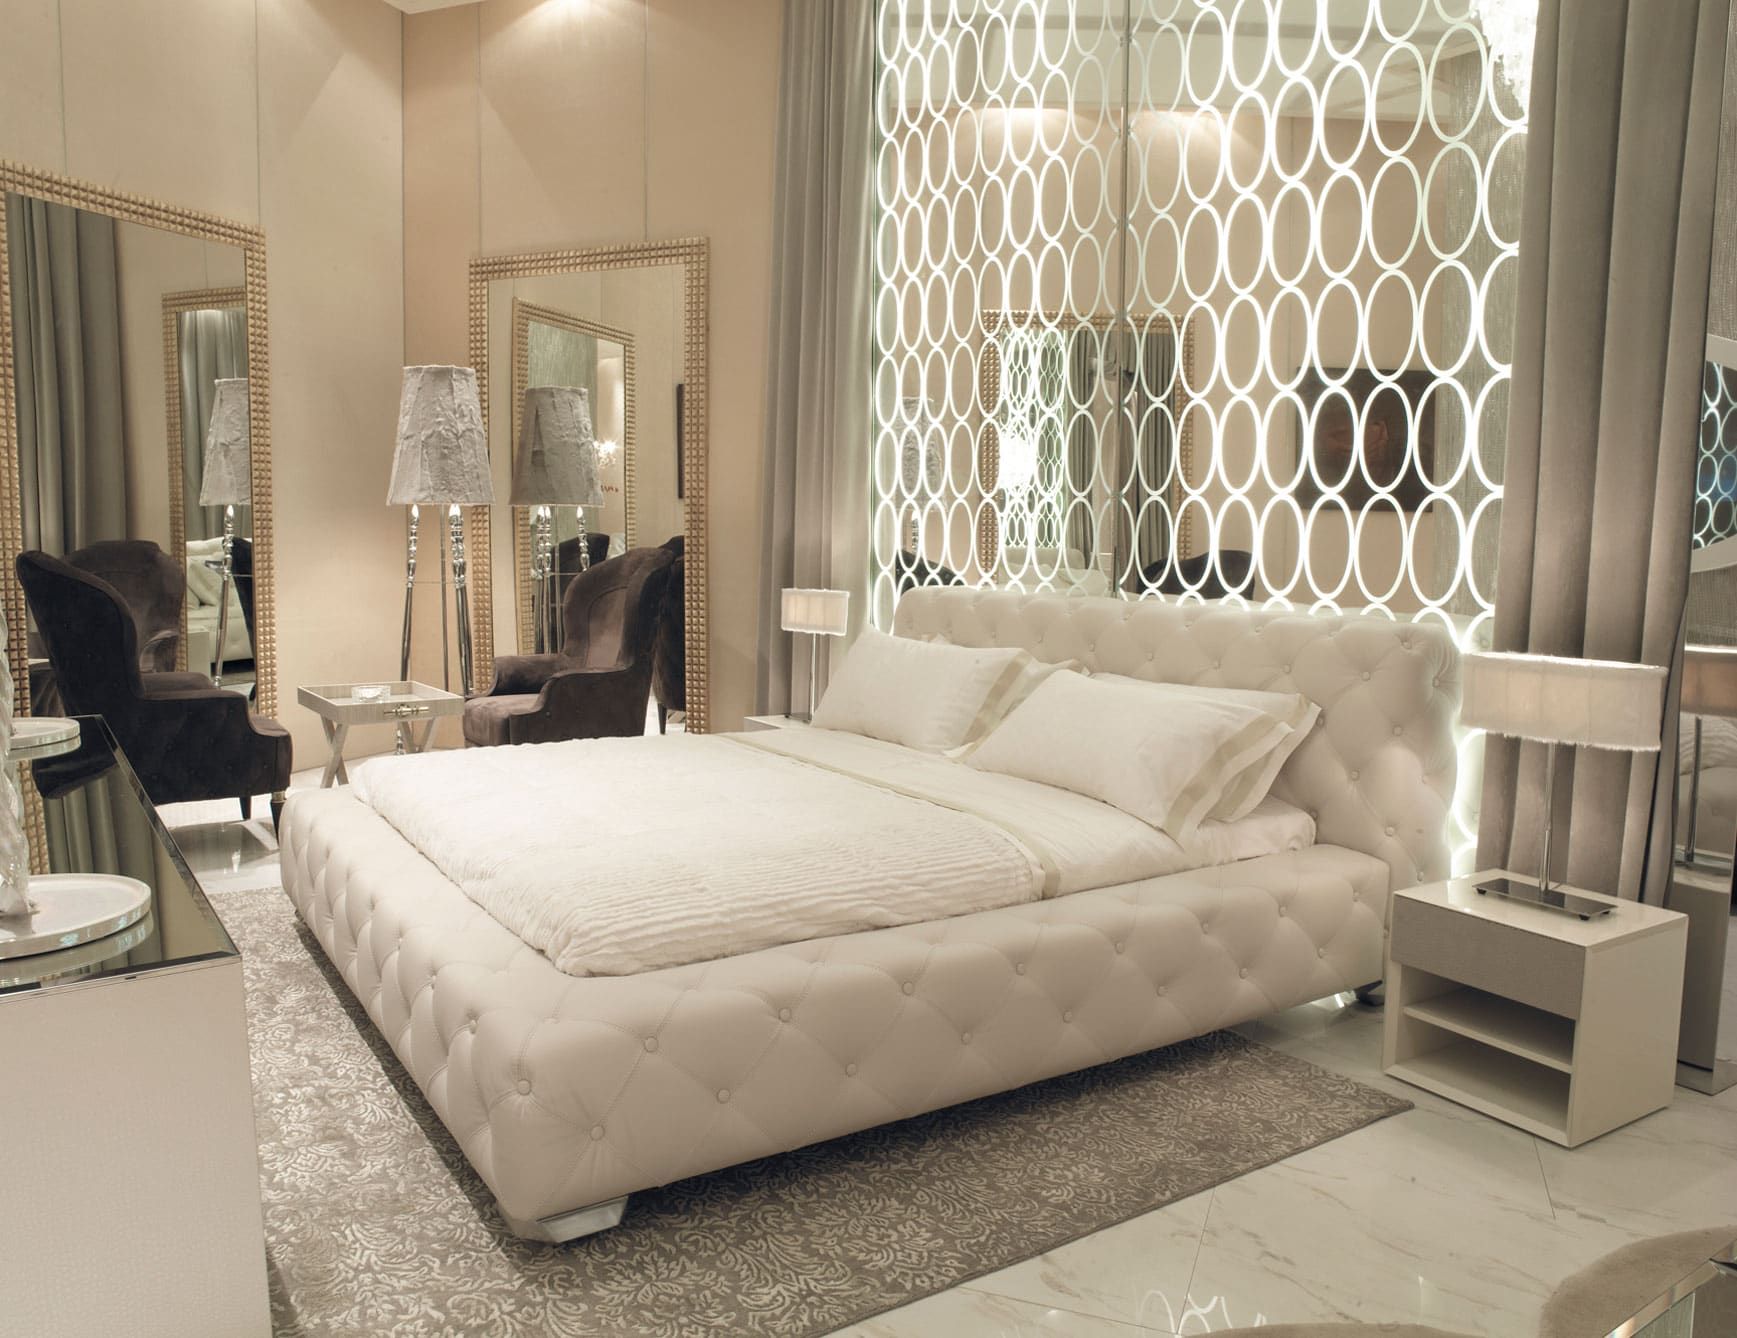 Teodosio modern luxury bed with white fabric